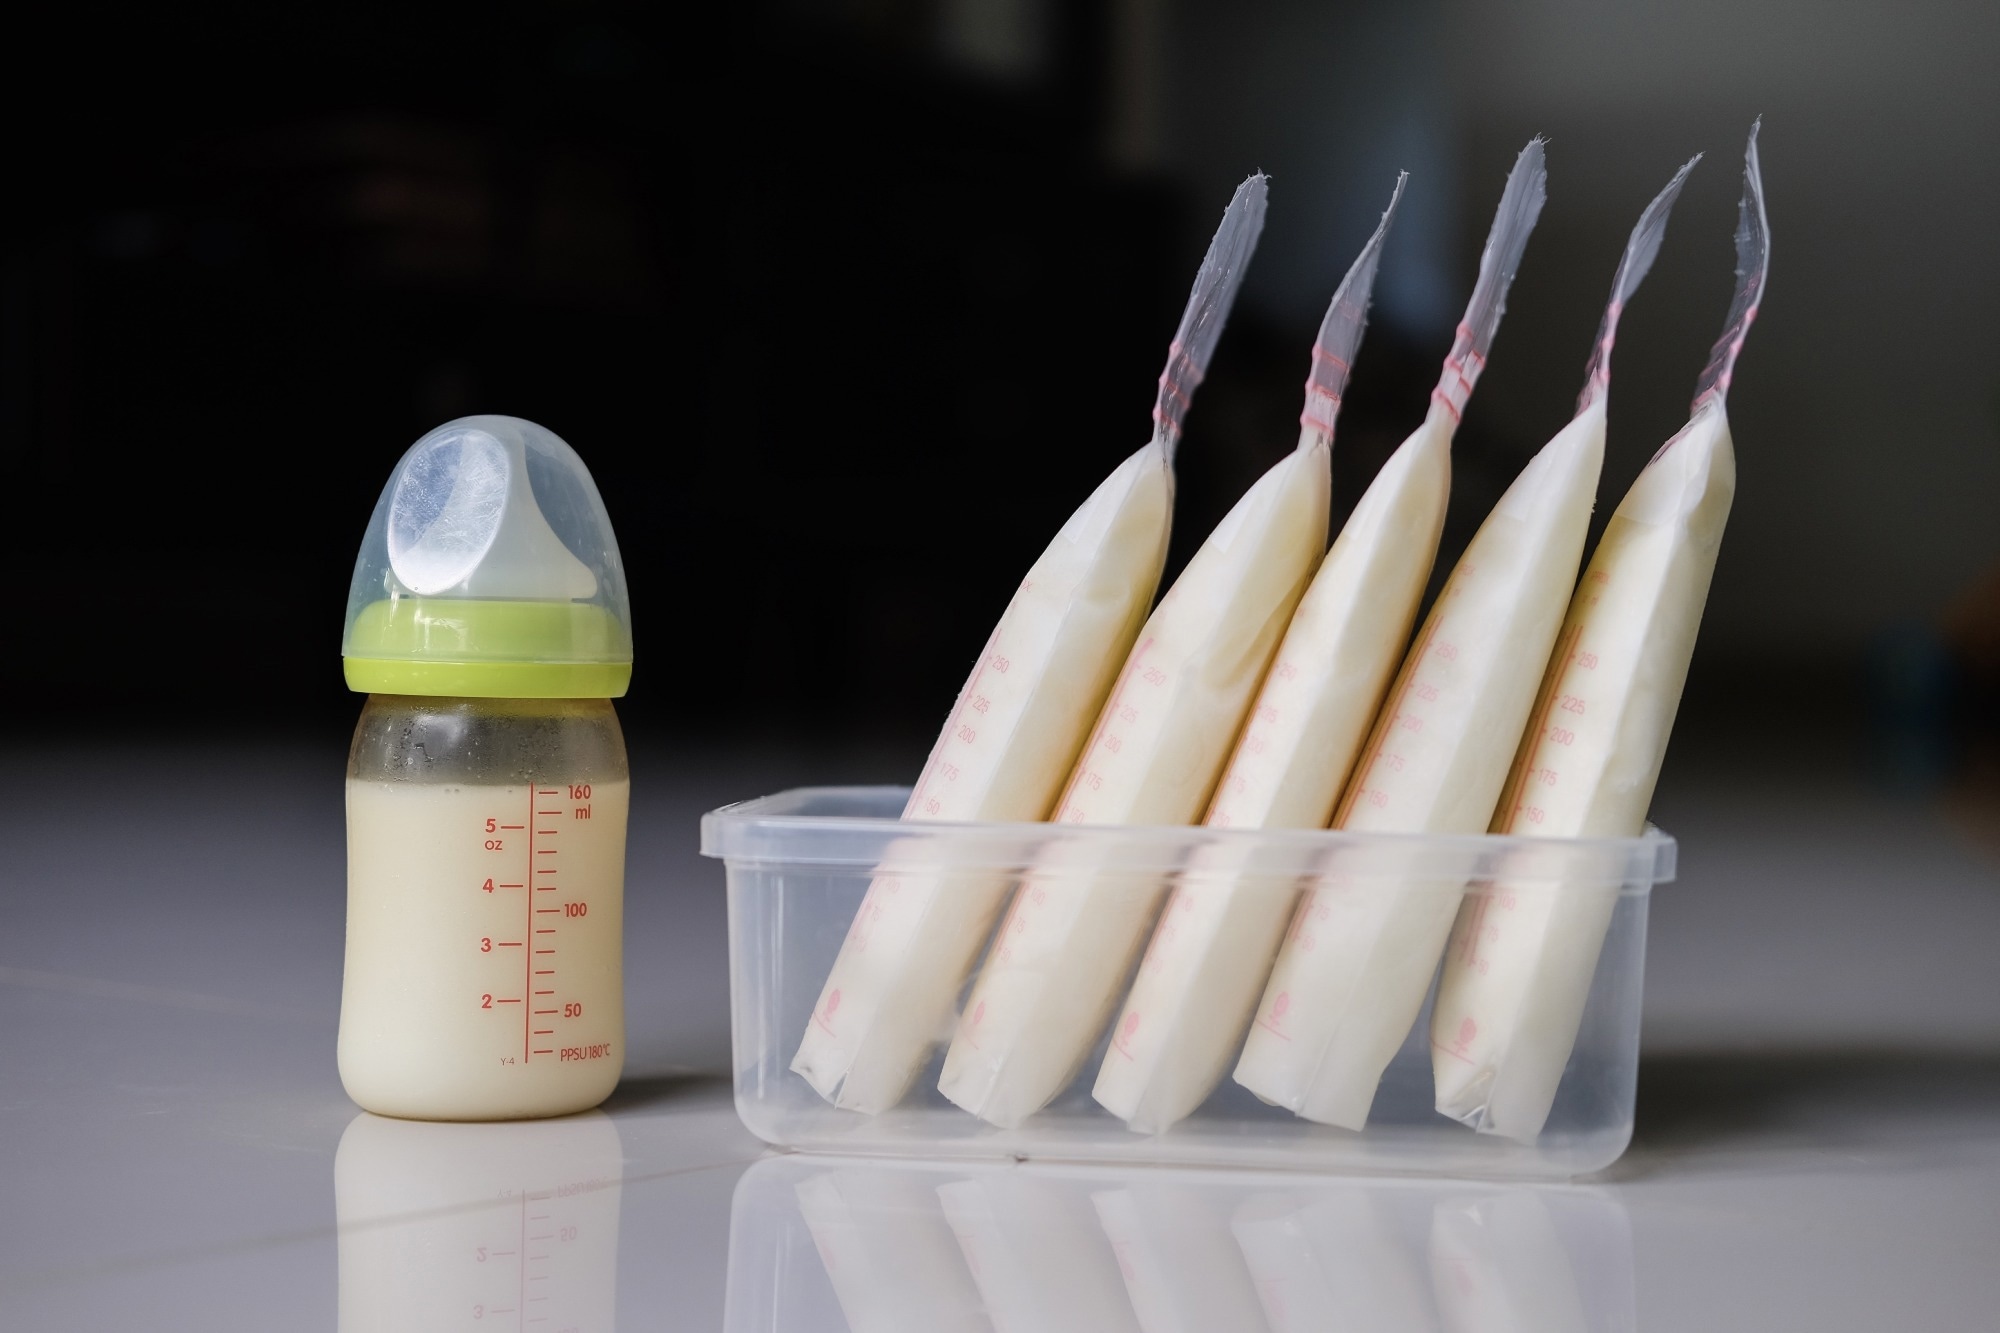 Study: Associations between Maternal Nutrition and the Concentrations of Human Milk Oligosaccharides in a Cohort of Healthy Australian Lactating Women. Image Credit: Paradee Siriboon / Shutterstock.com